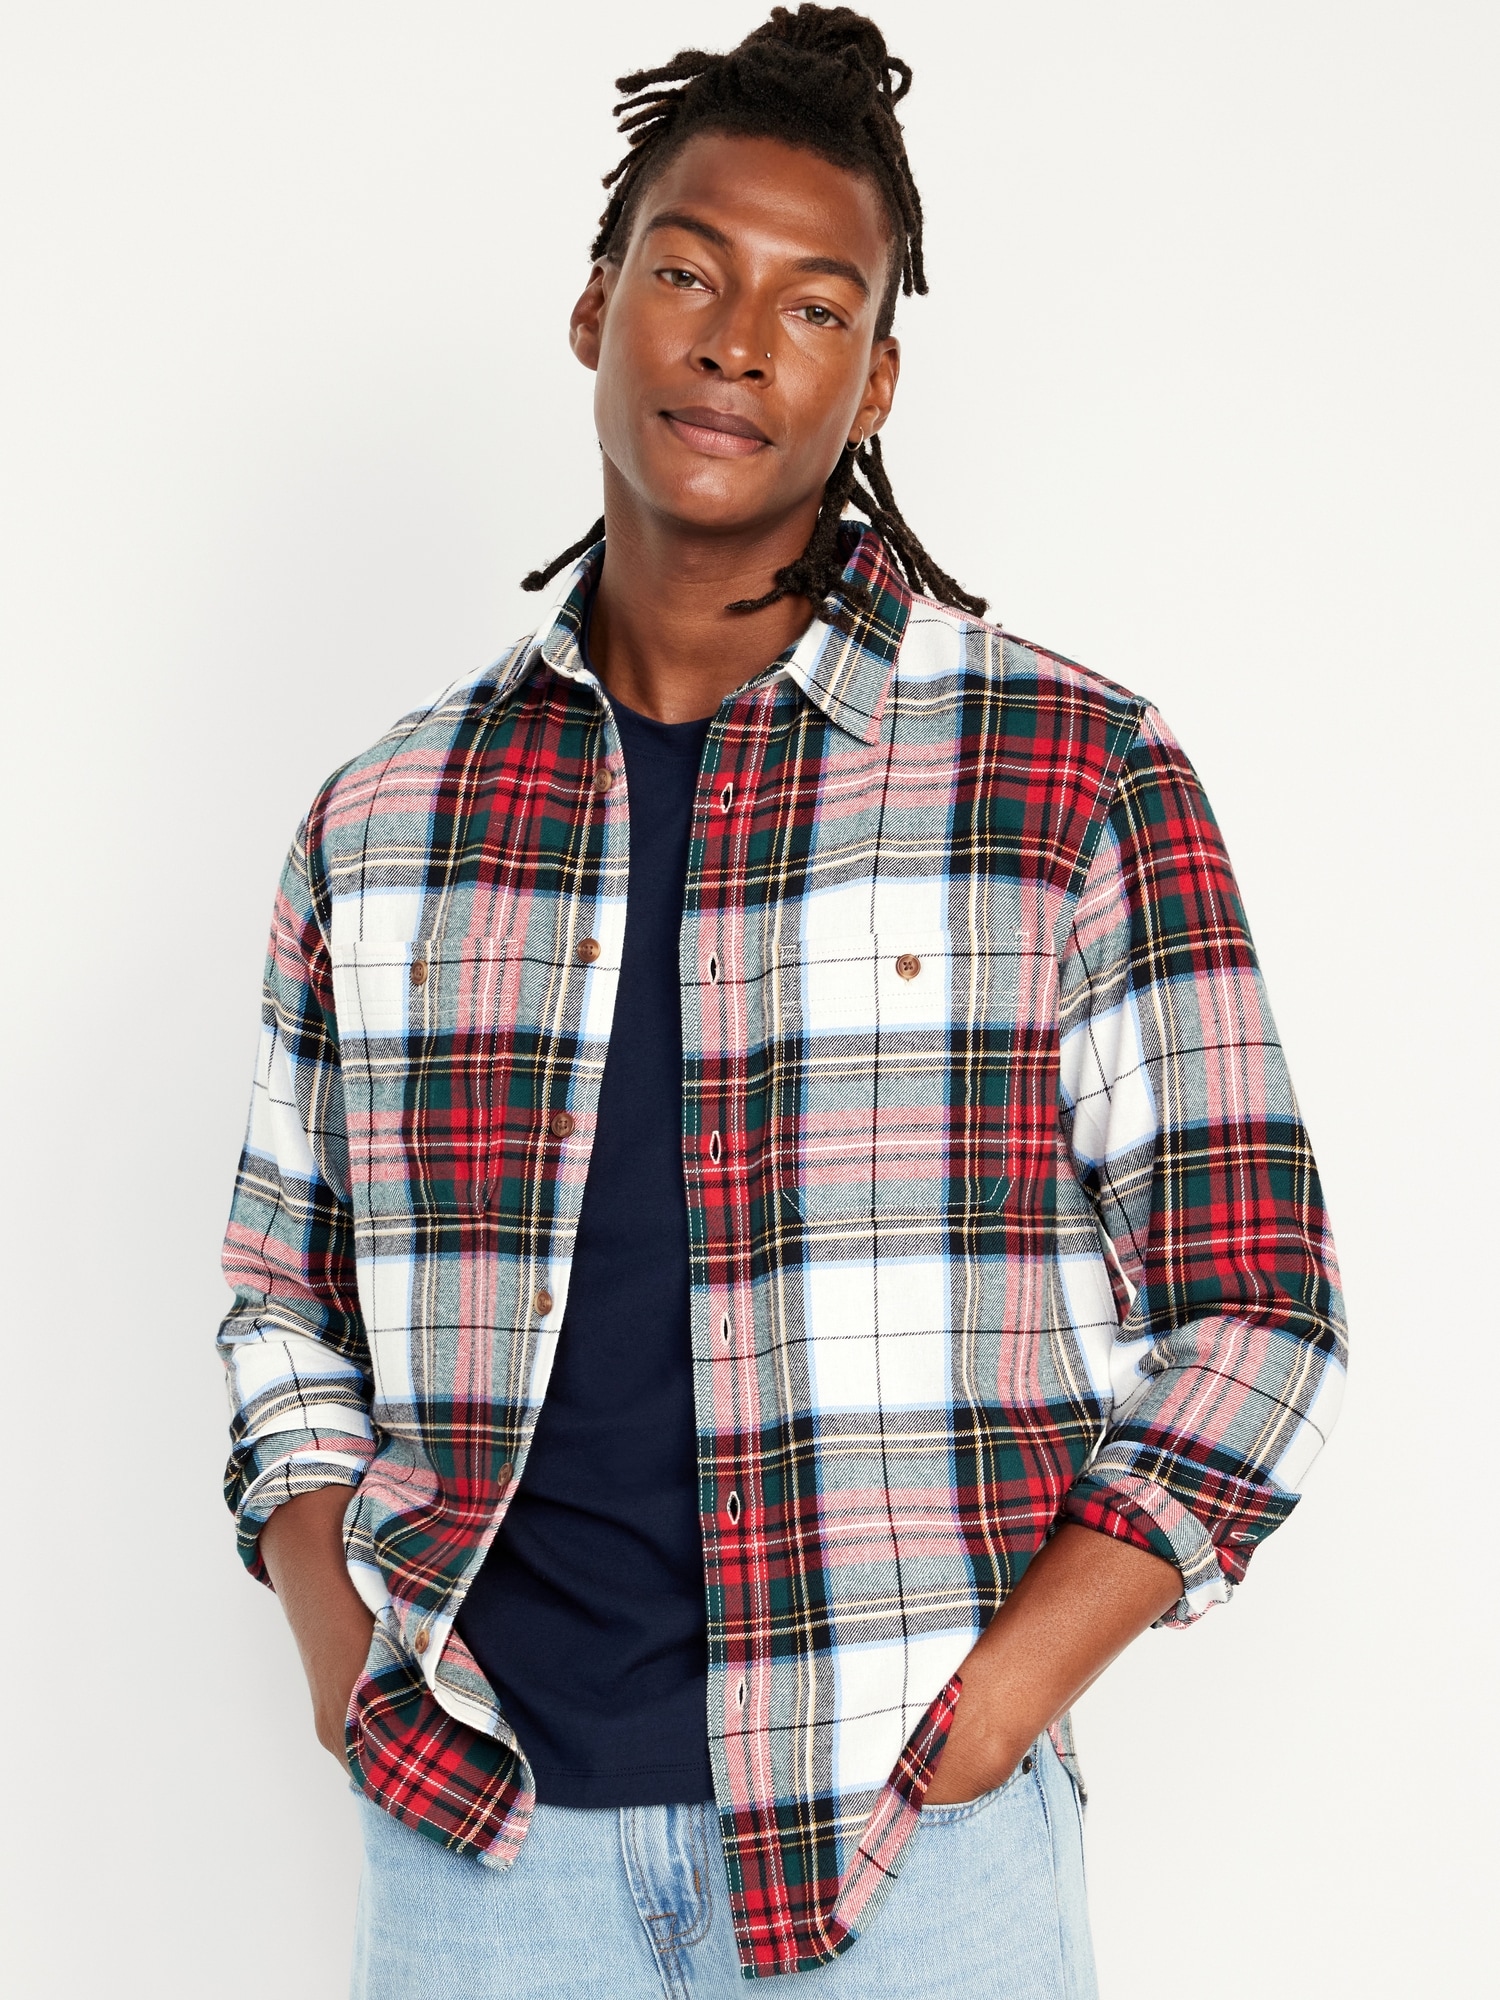 Double-Brushed Flannel Shirt